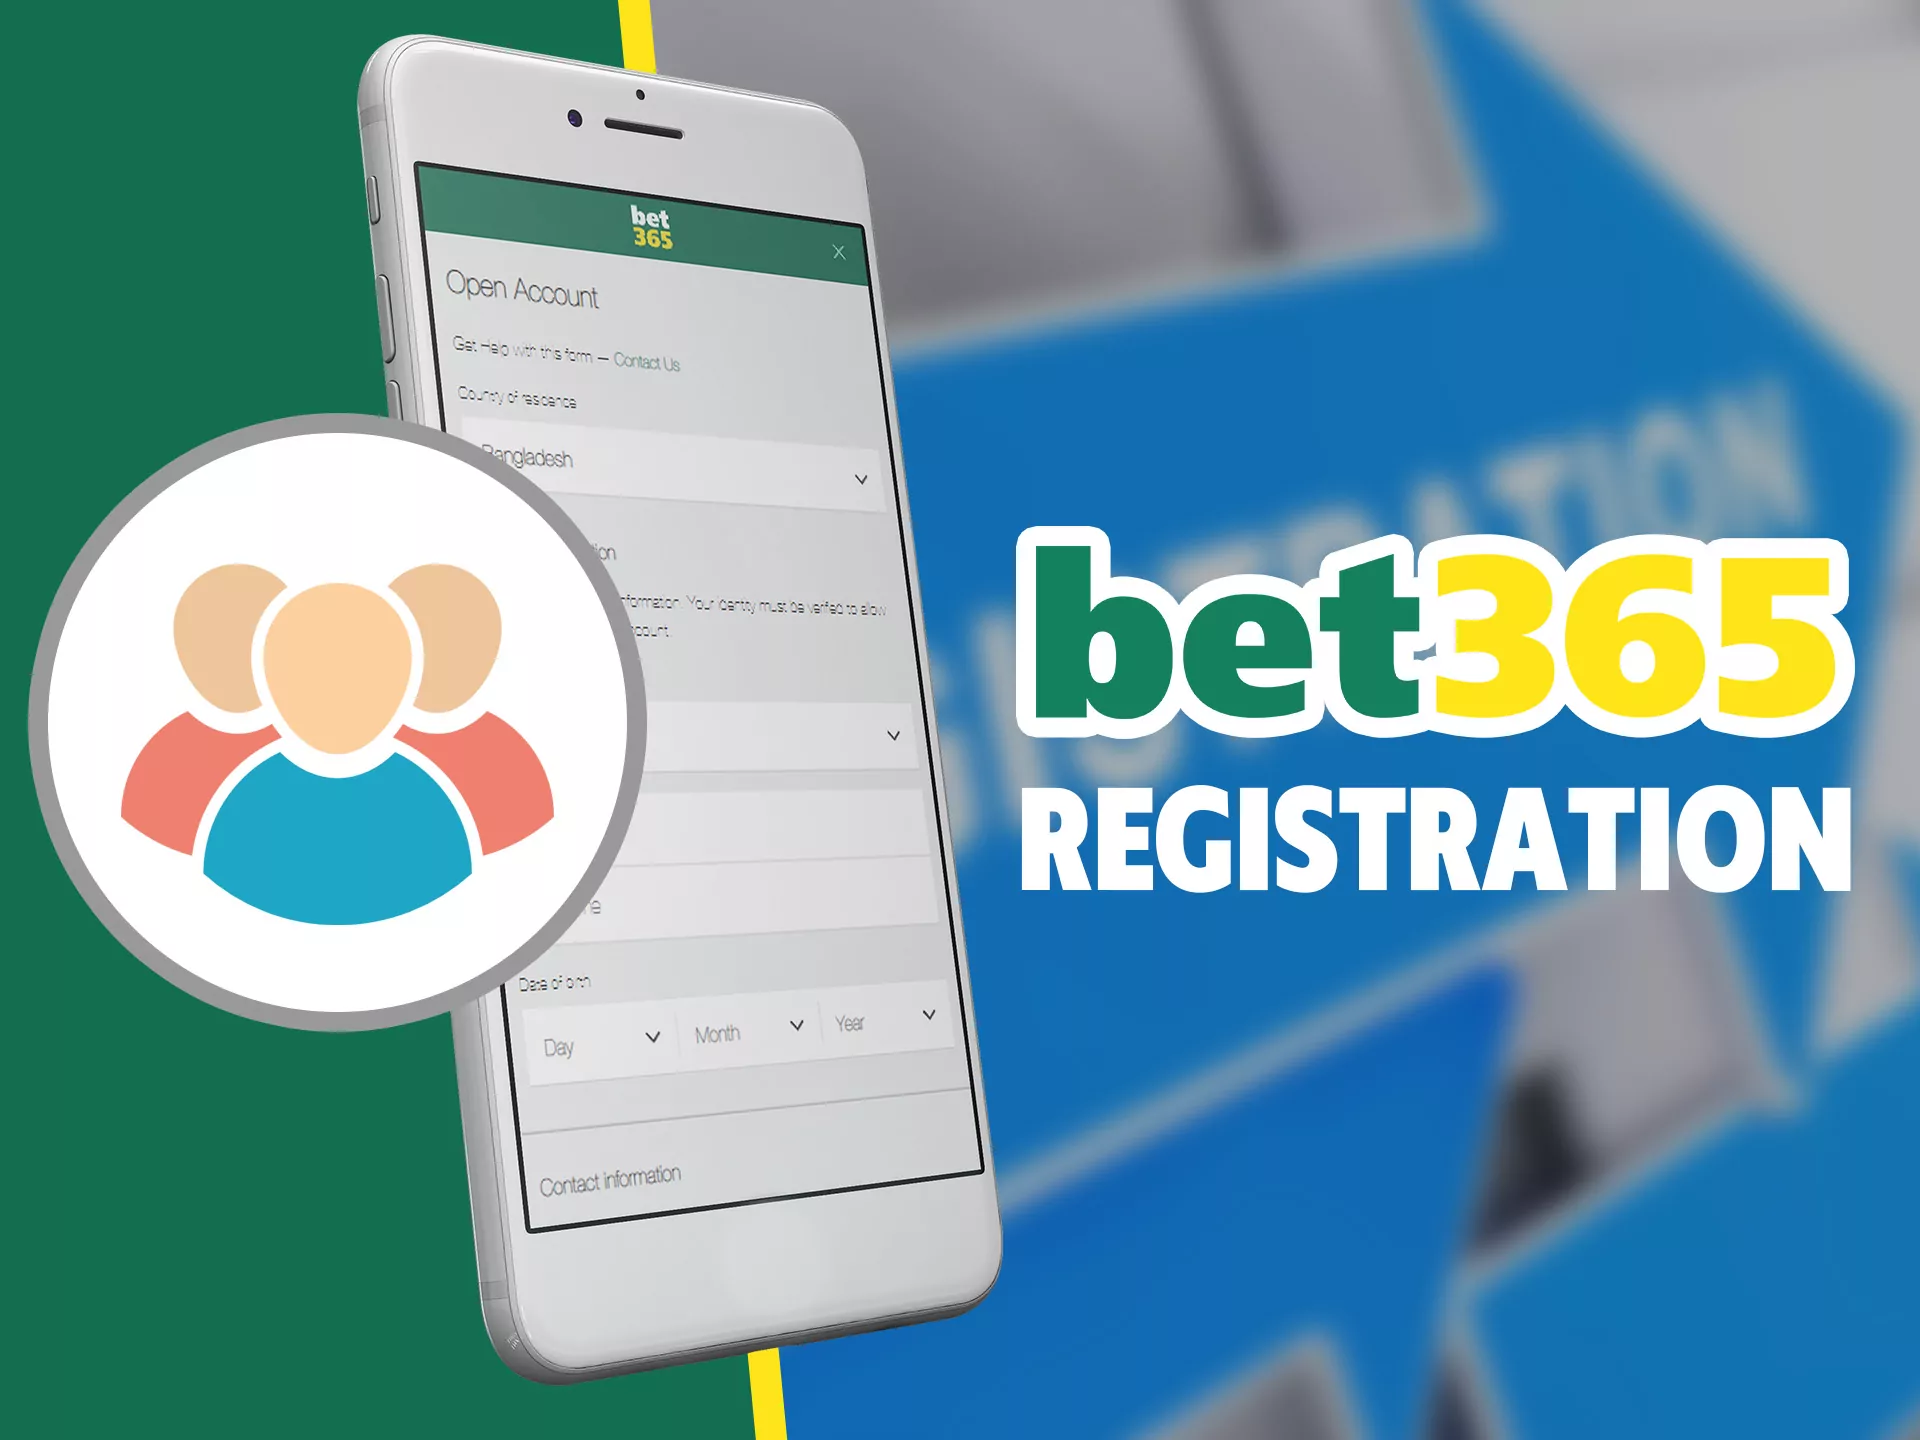 It's much faster to registrate in Bet365 app.